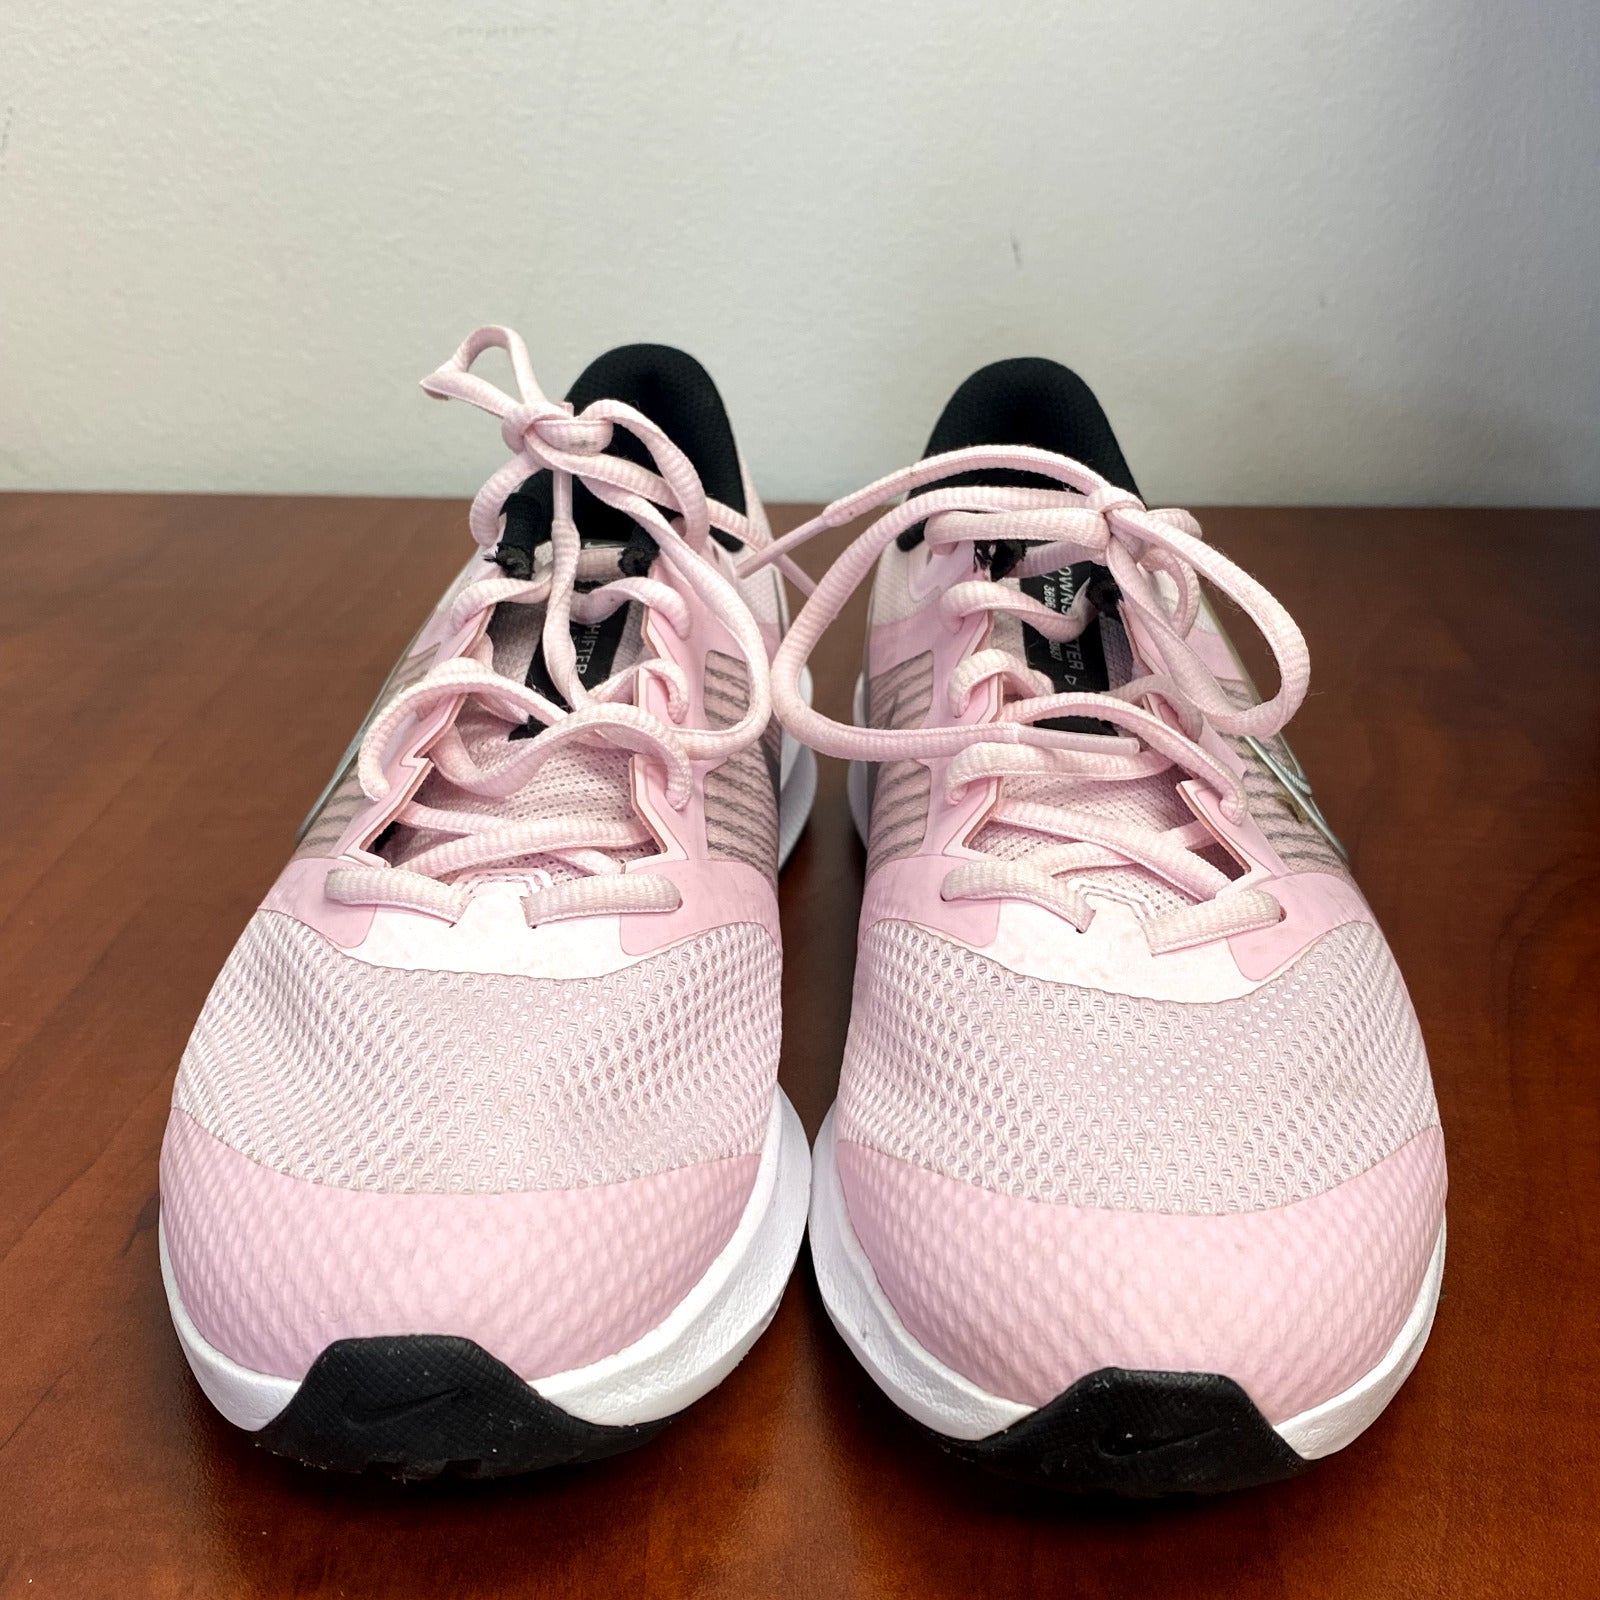 Nike Downshifter Light Pink Solid Mesh Toe Low Top Running Shoes Women Size 7Y